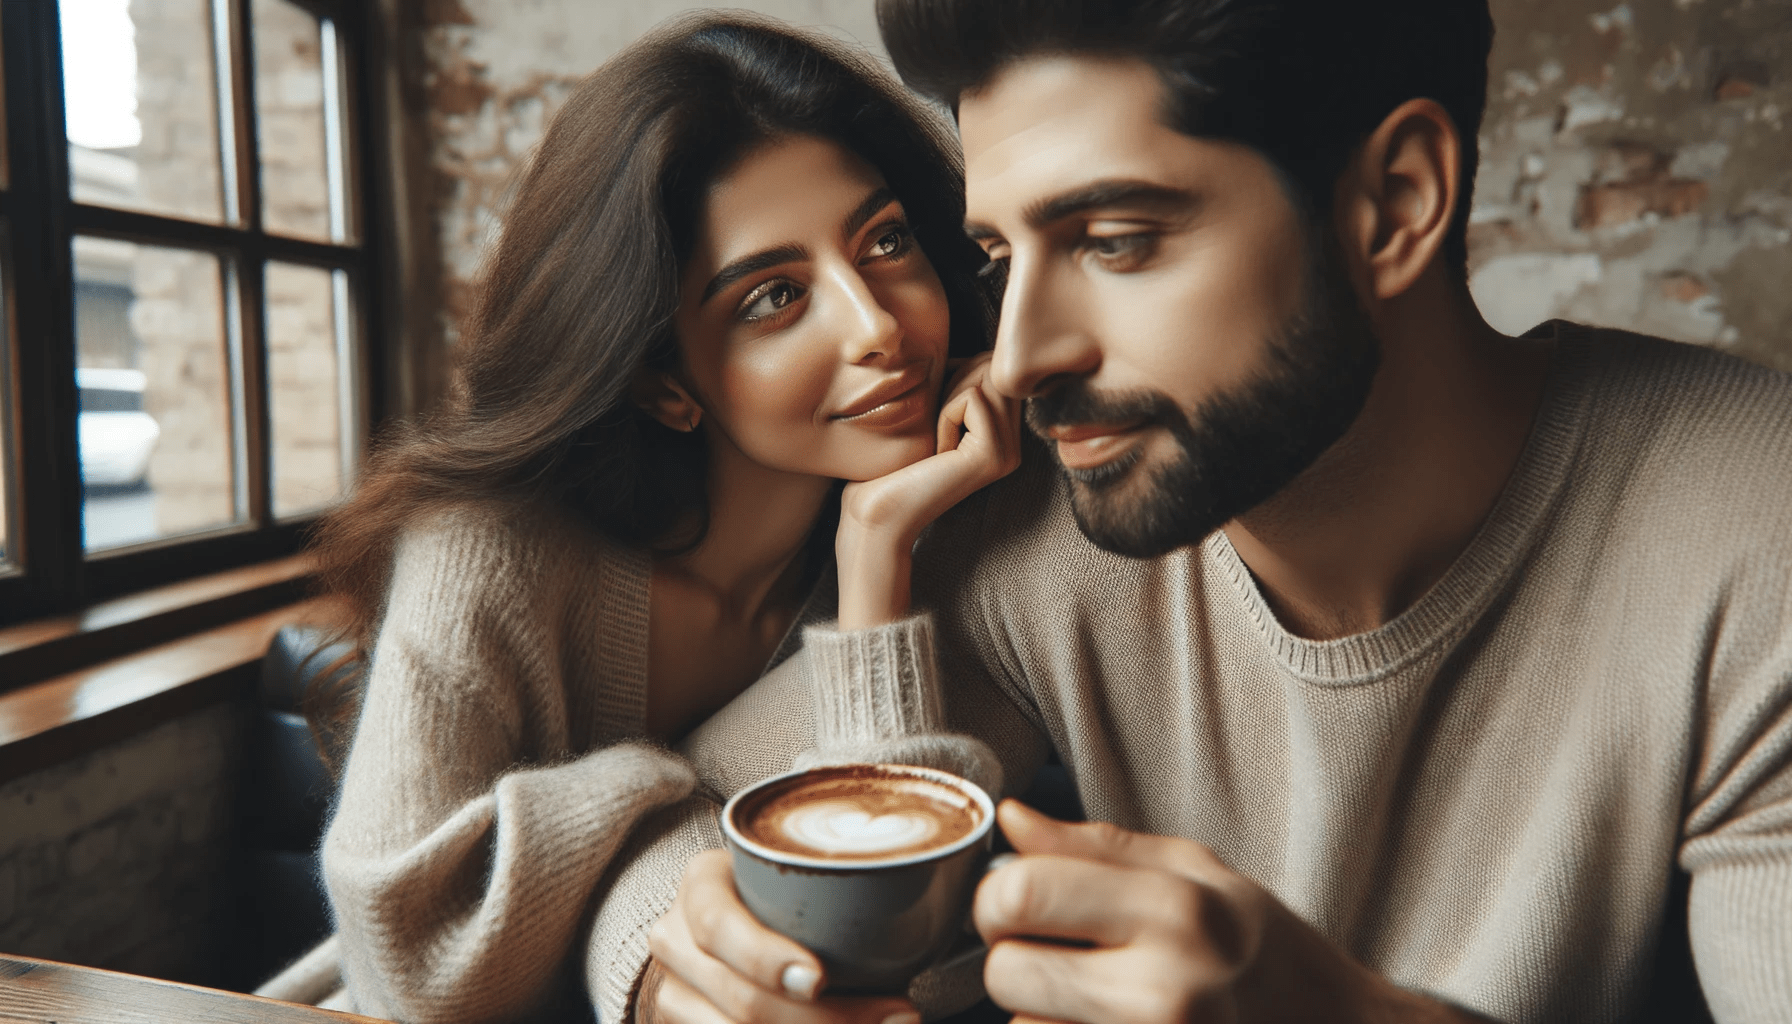 Photo in a cozy cafe setting. A couple sits side by side the woman of Middle Eastern descent tenderly looks at the man her eyes filled with genuine